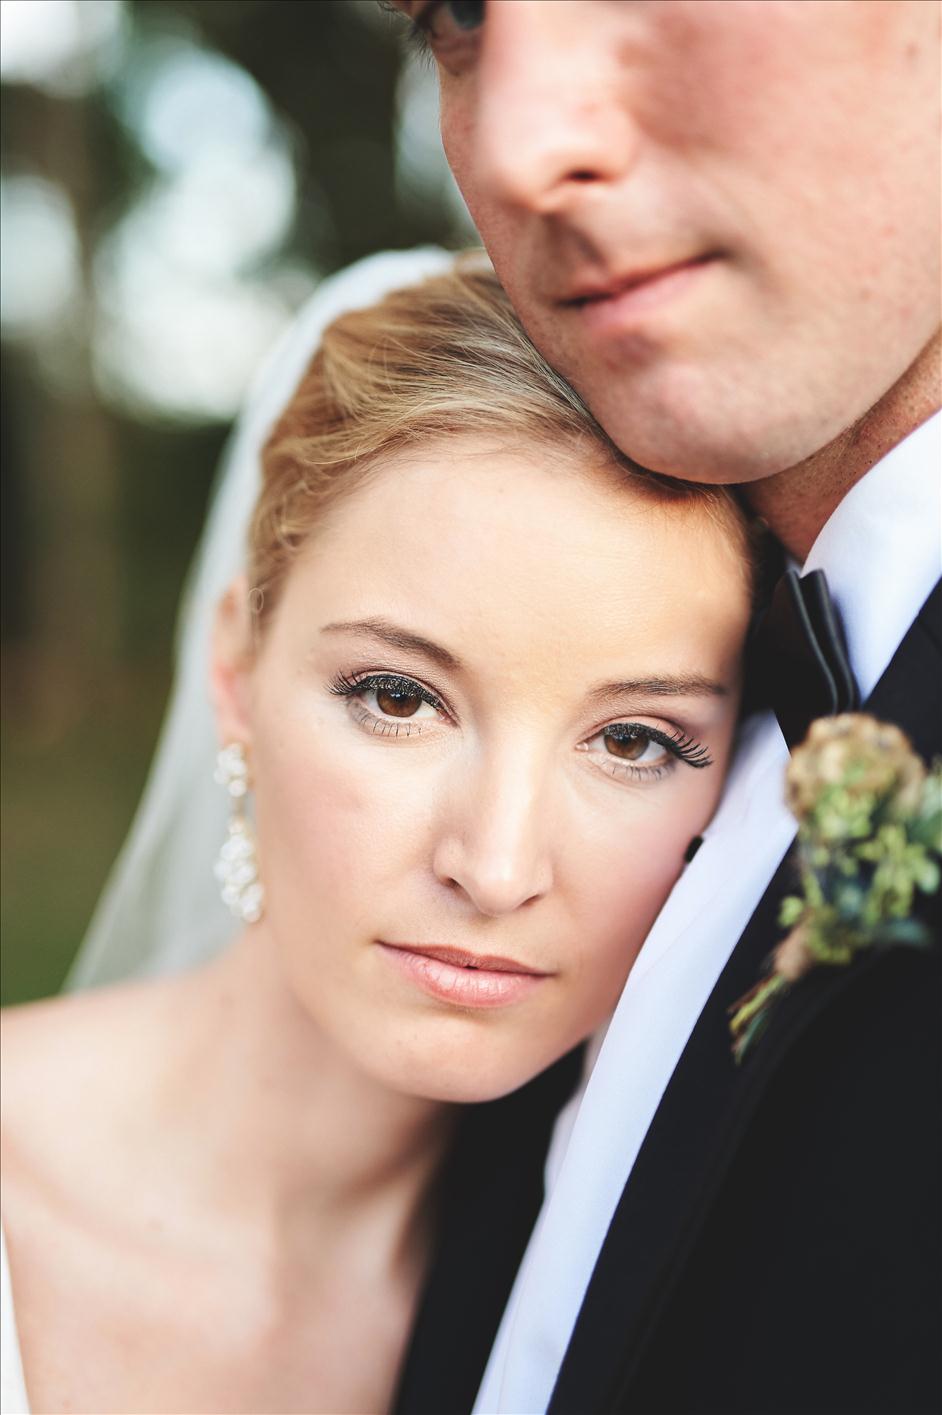 4 Potential Wedding Portrait Crises (and What to Do About Them) // Wedding Photography Tips from The Reason Photography for Nations Photo Lab